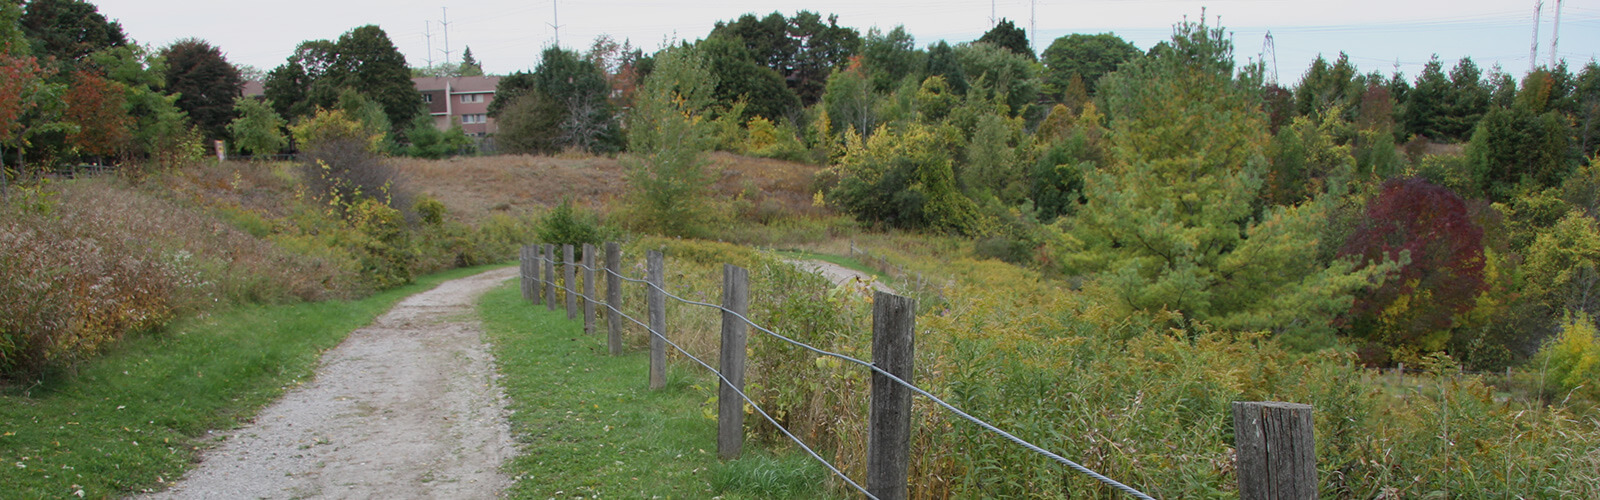 A wooden fence and gravel trail leading downhill